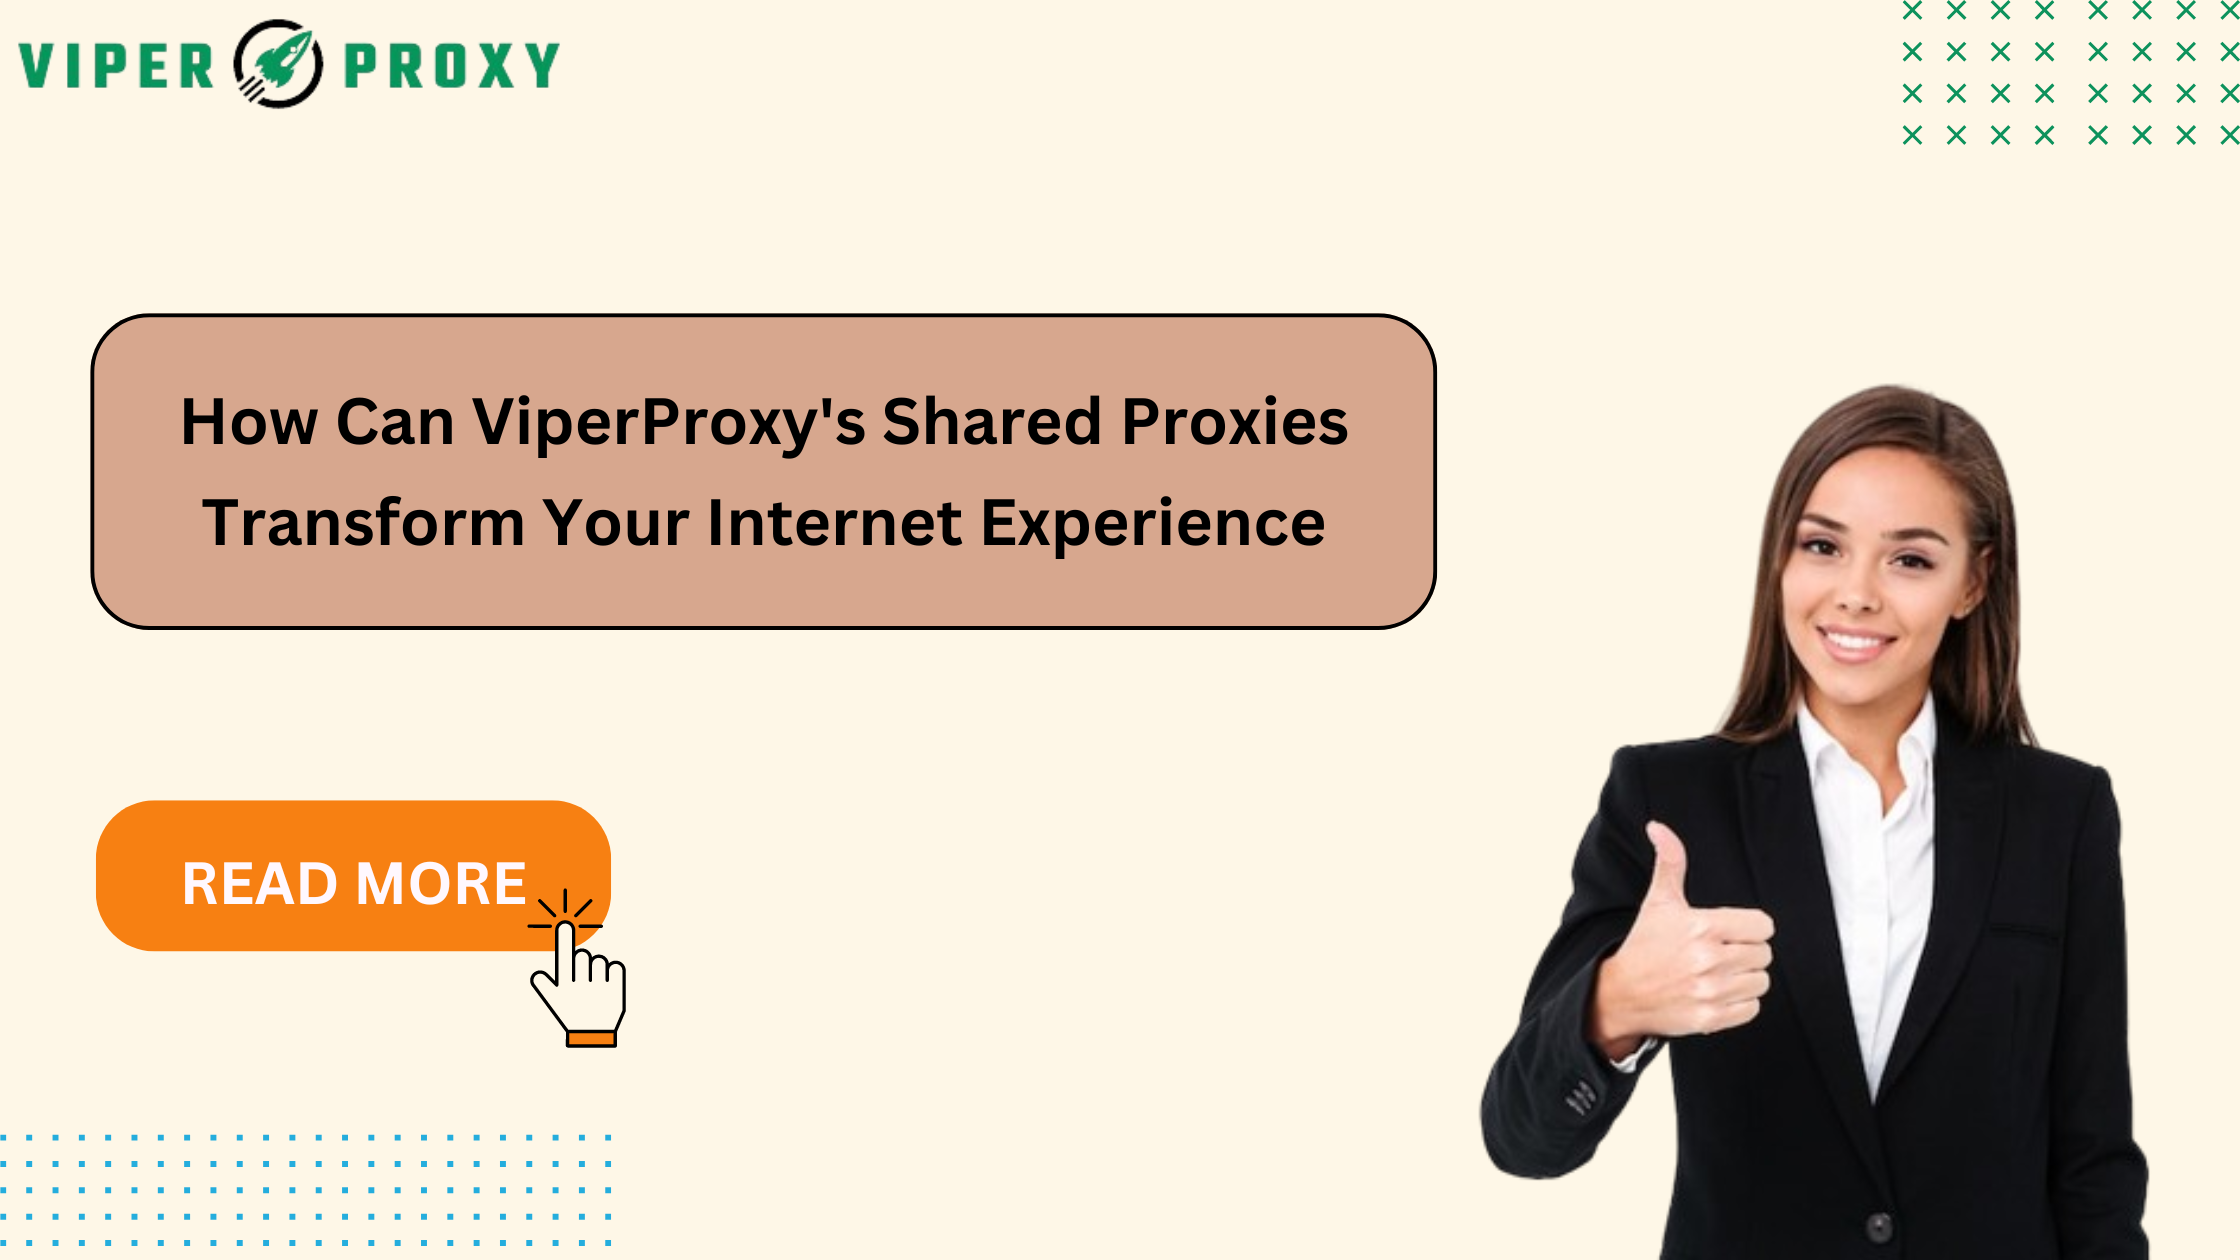 How Can ViperProxy's Shared Proxies Transform Your Internet Experience